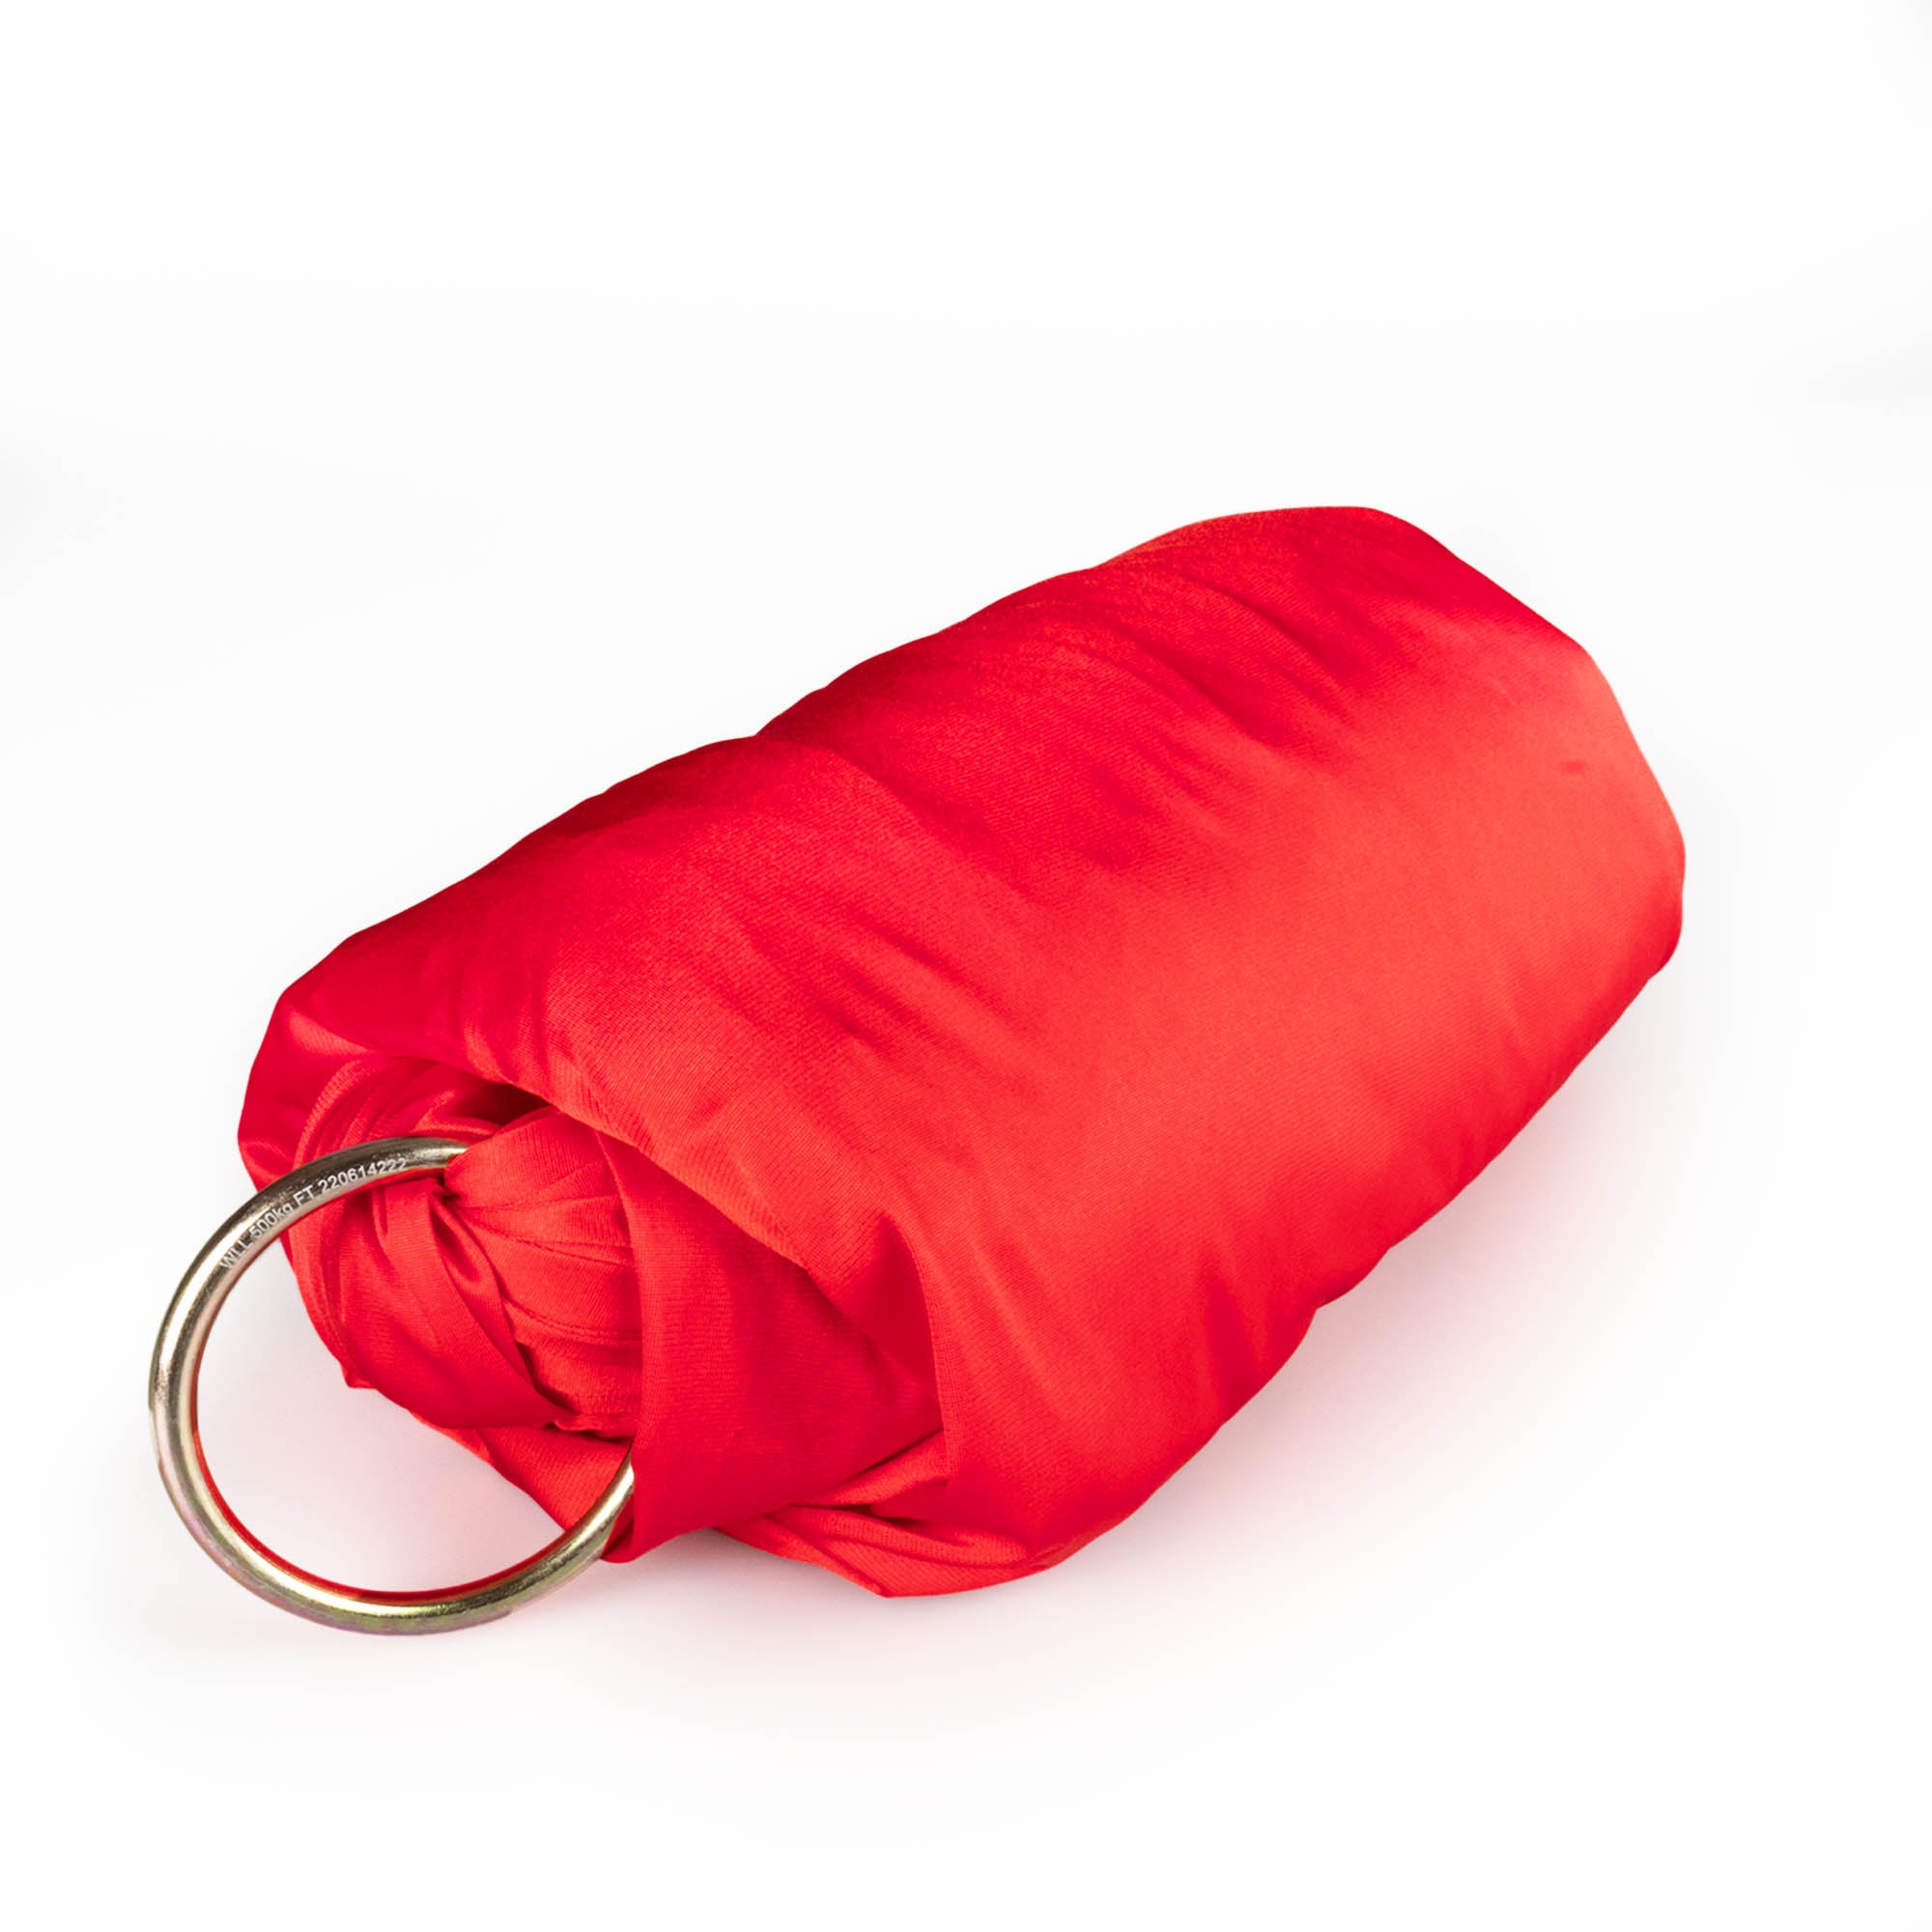 Red yoga hammock with O rings attached